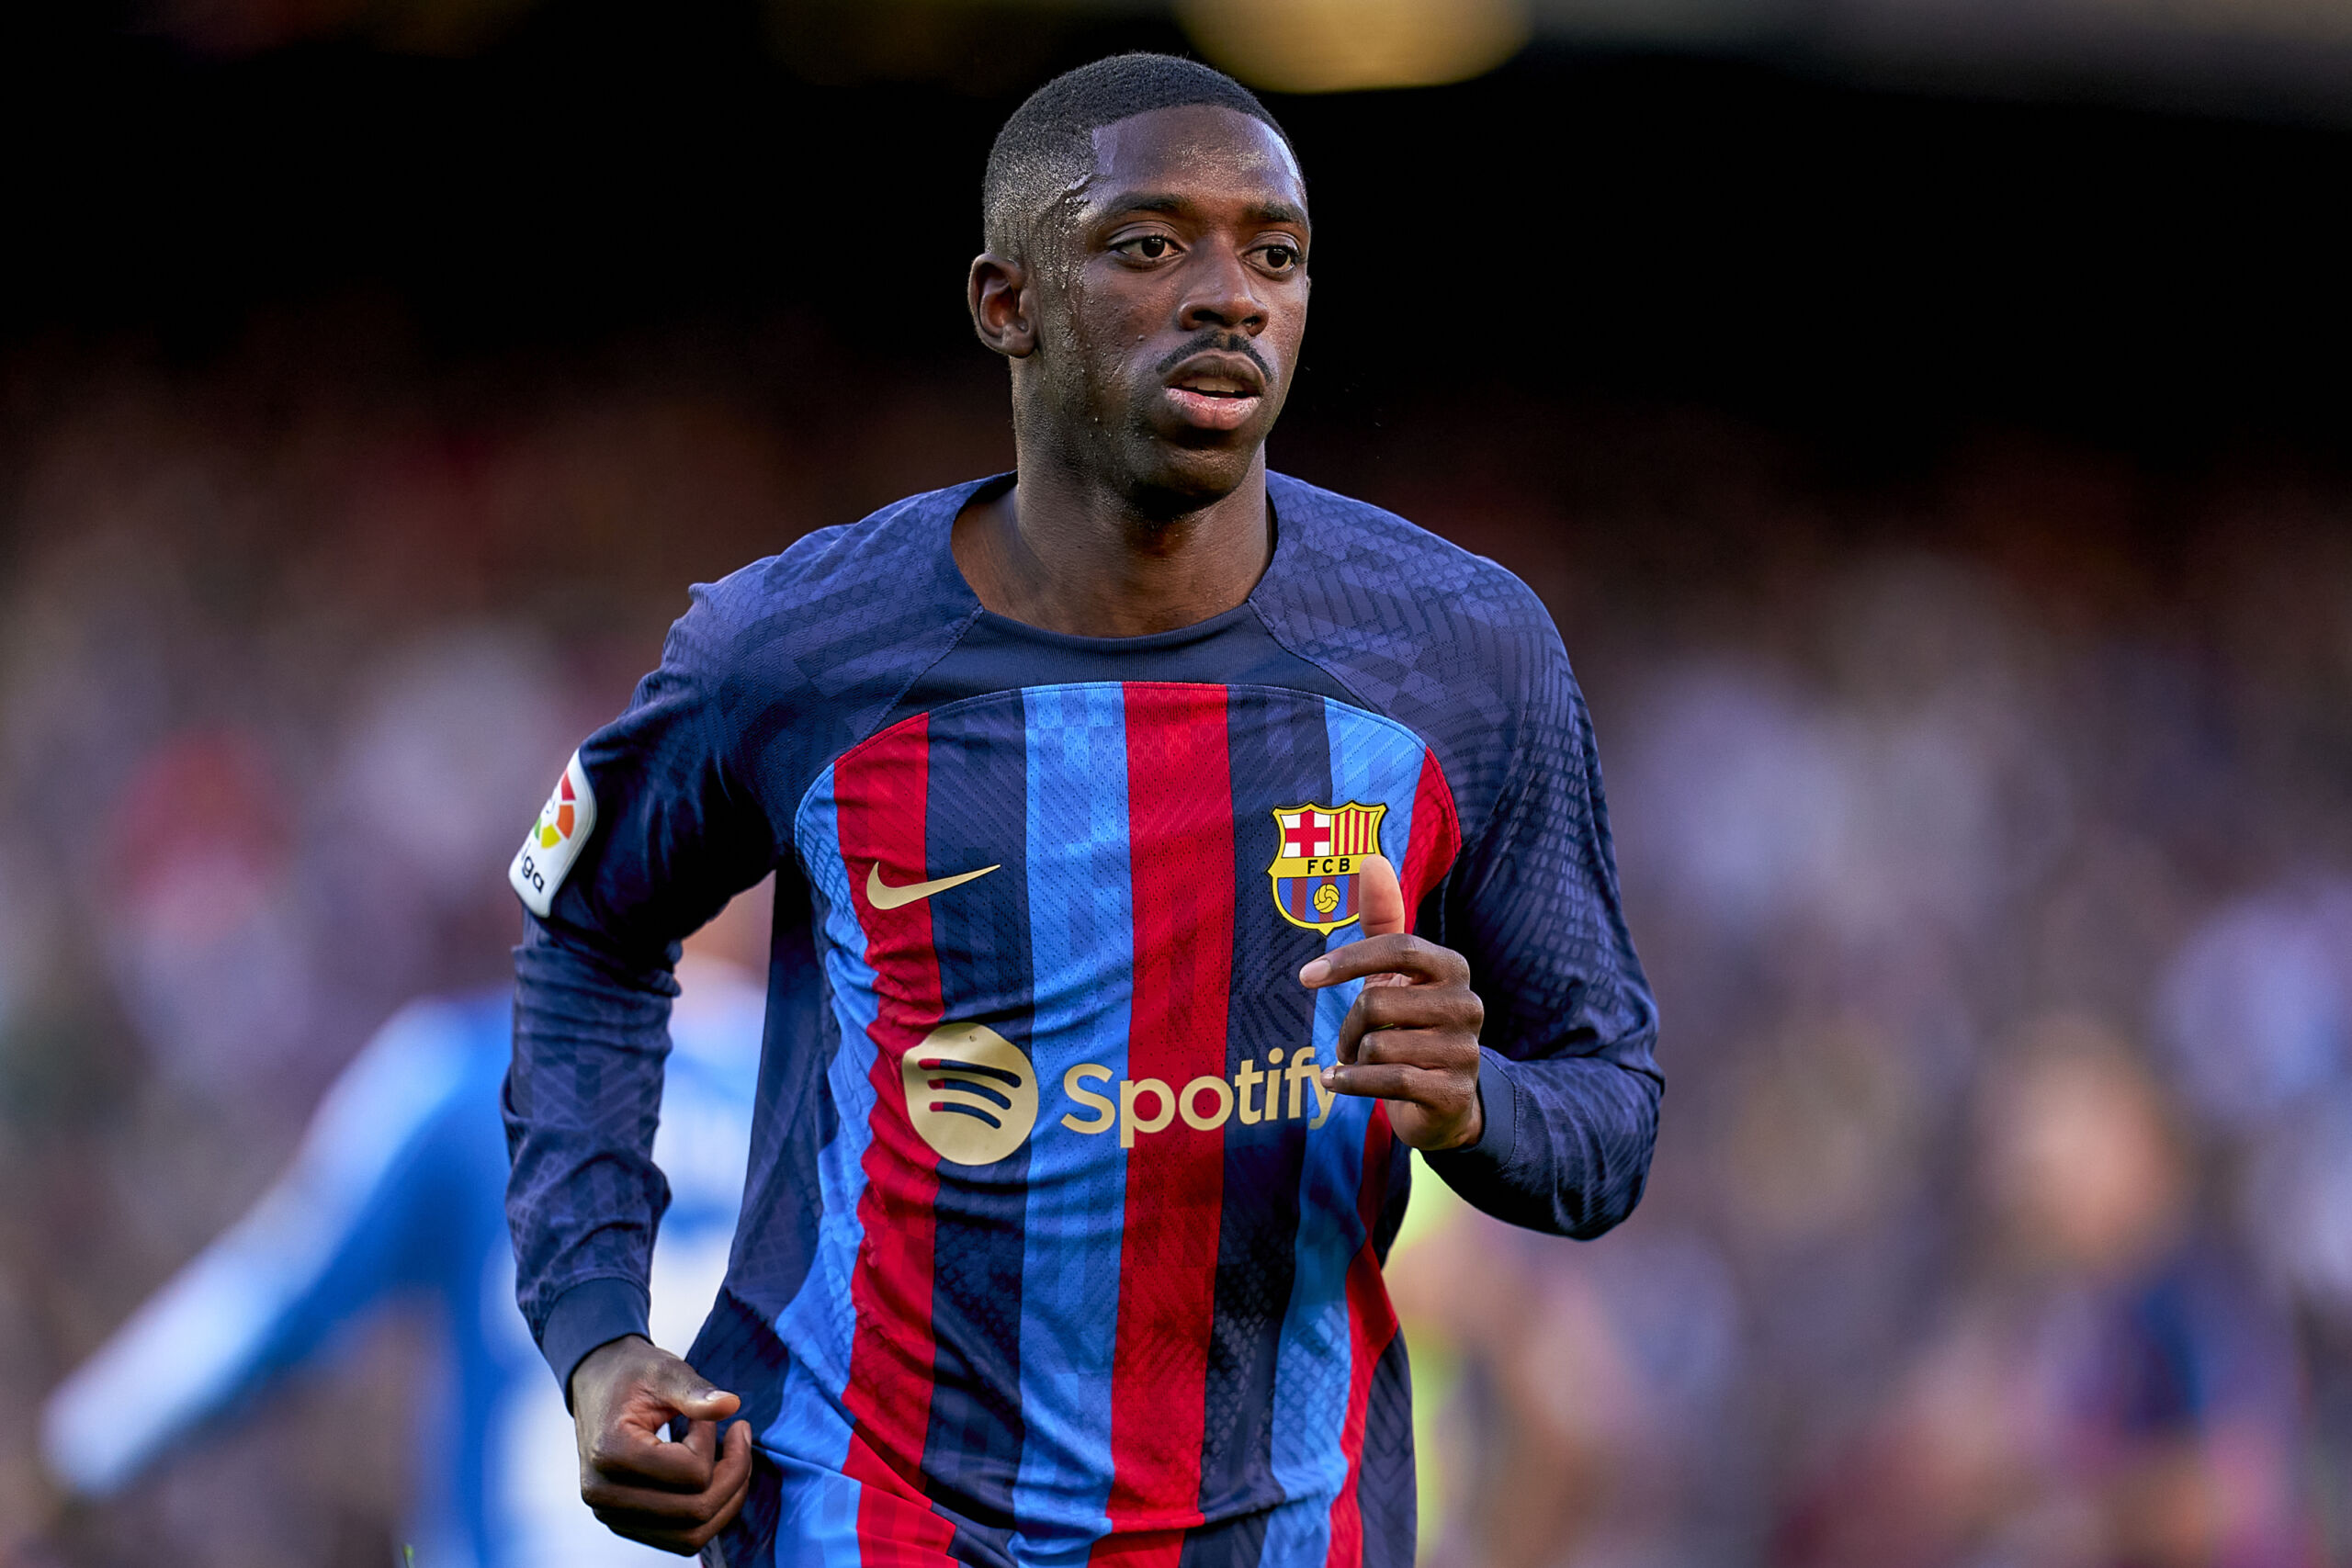 Real Madrid could hand Ousmane Dembele blow to Barcelona